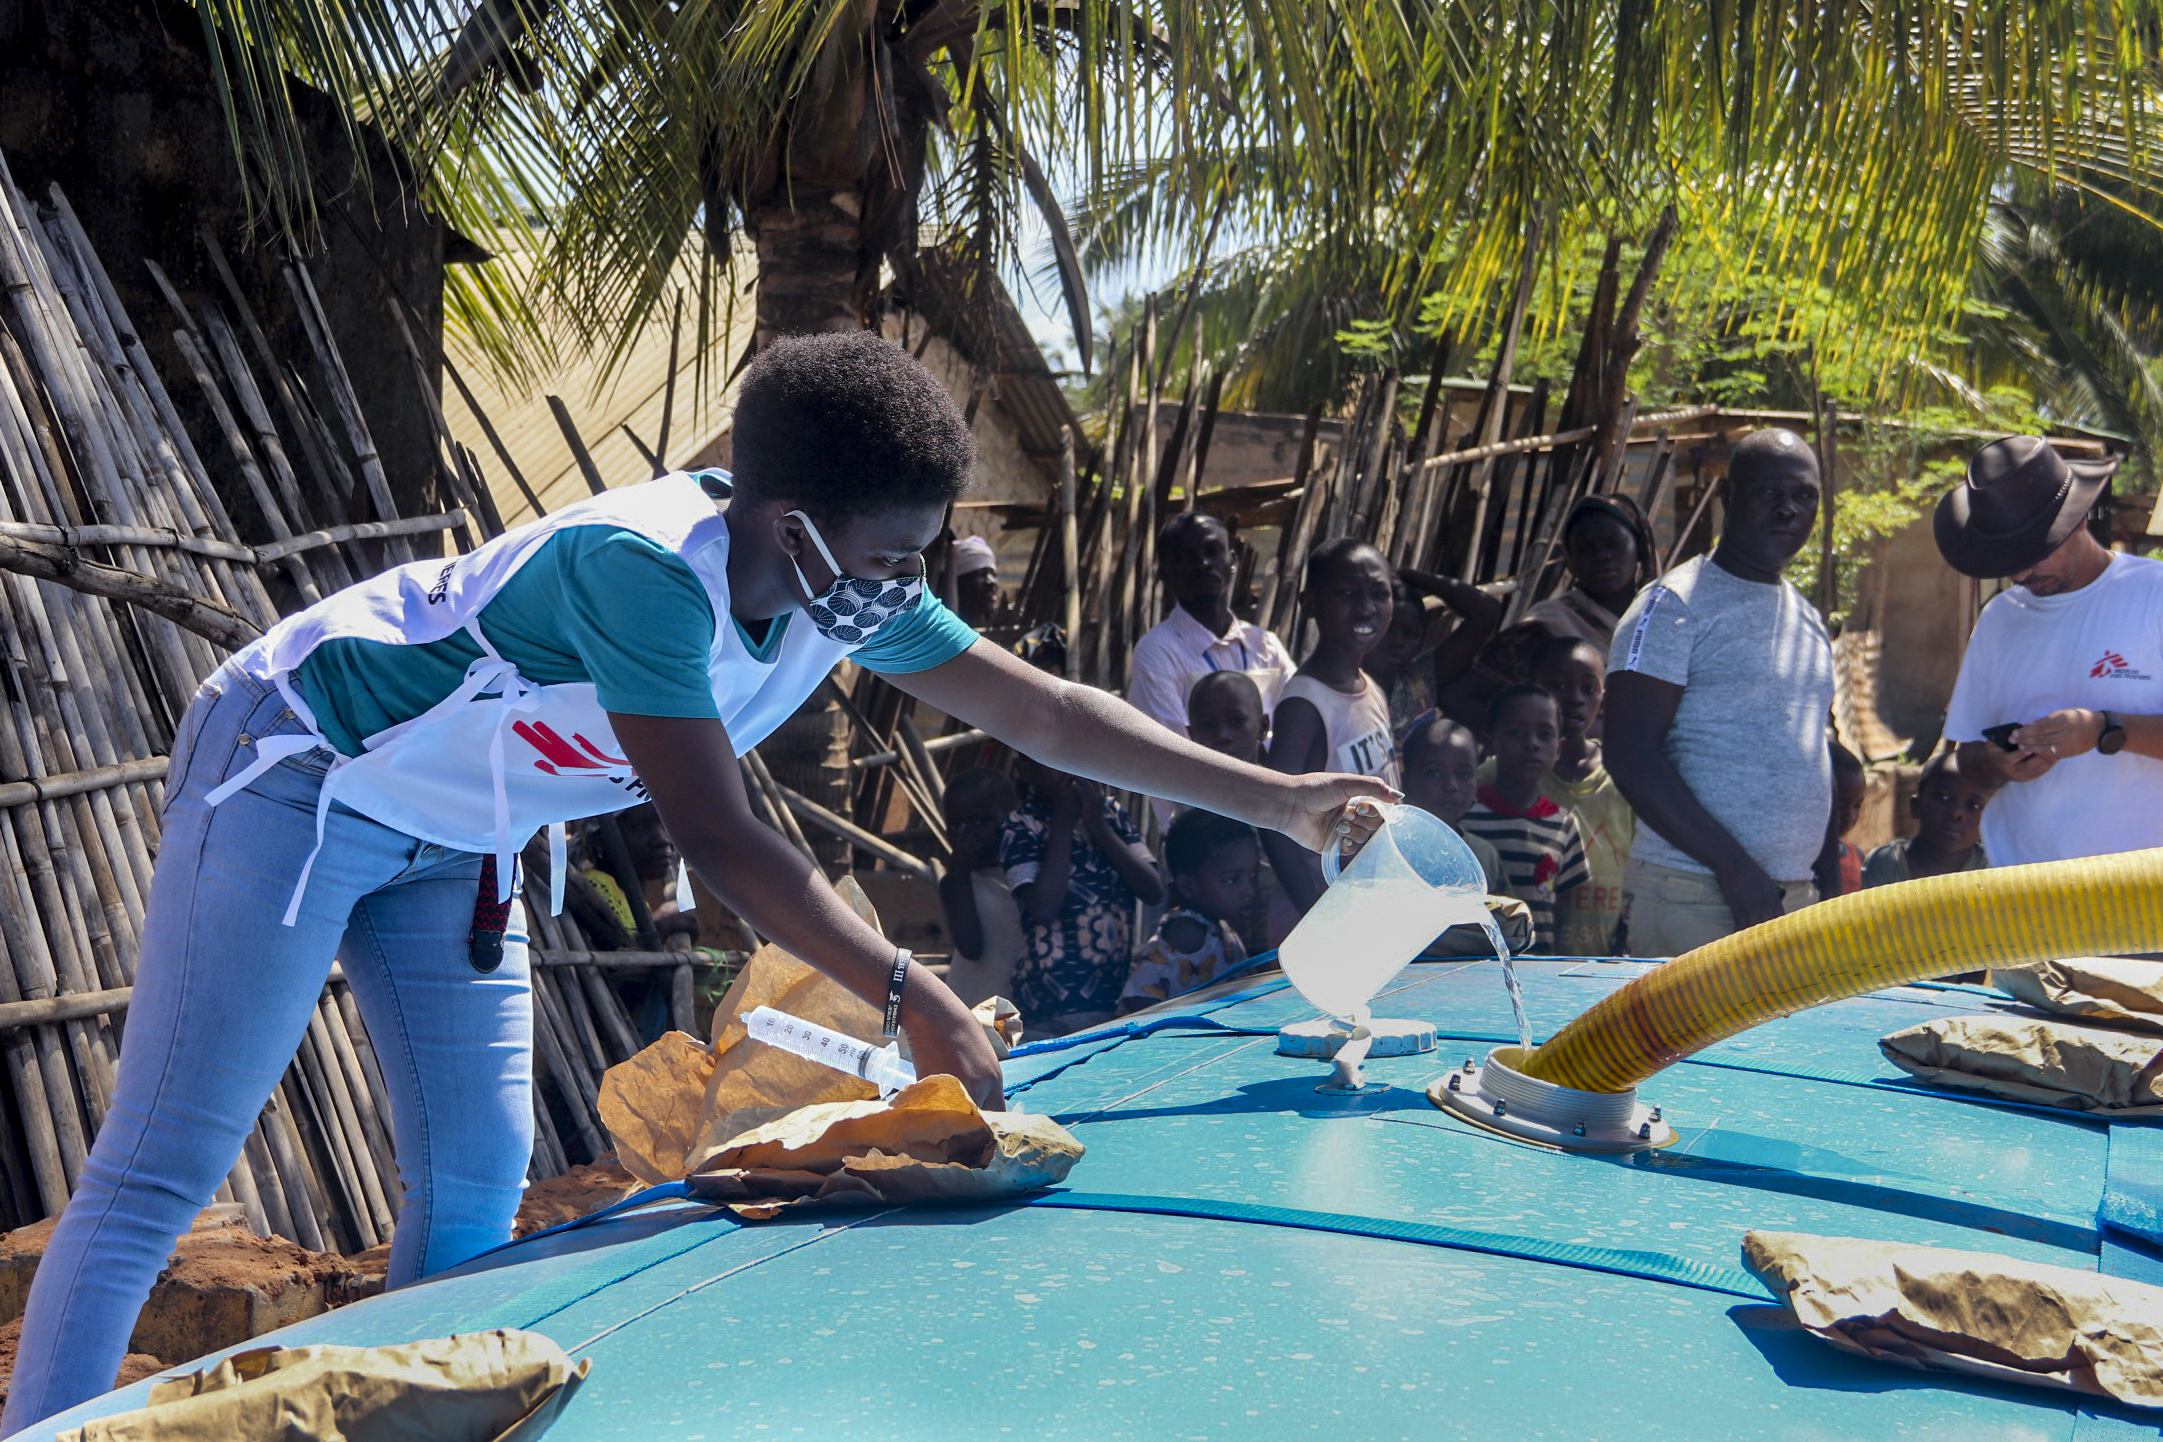 MSF staff member manages water treatment at a distribution site in the Natiti neighborhood of Pemba. April 2020. ©MSF